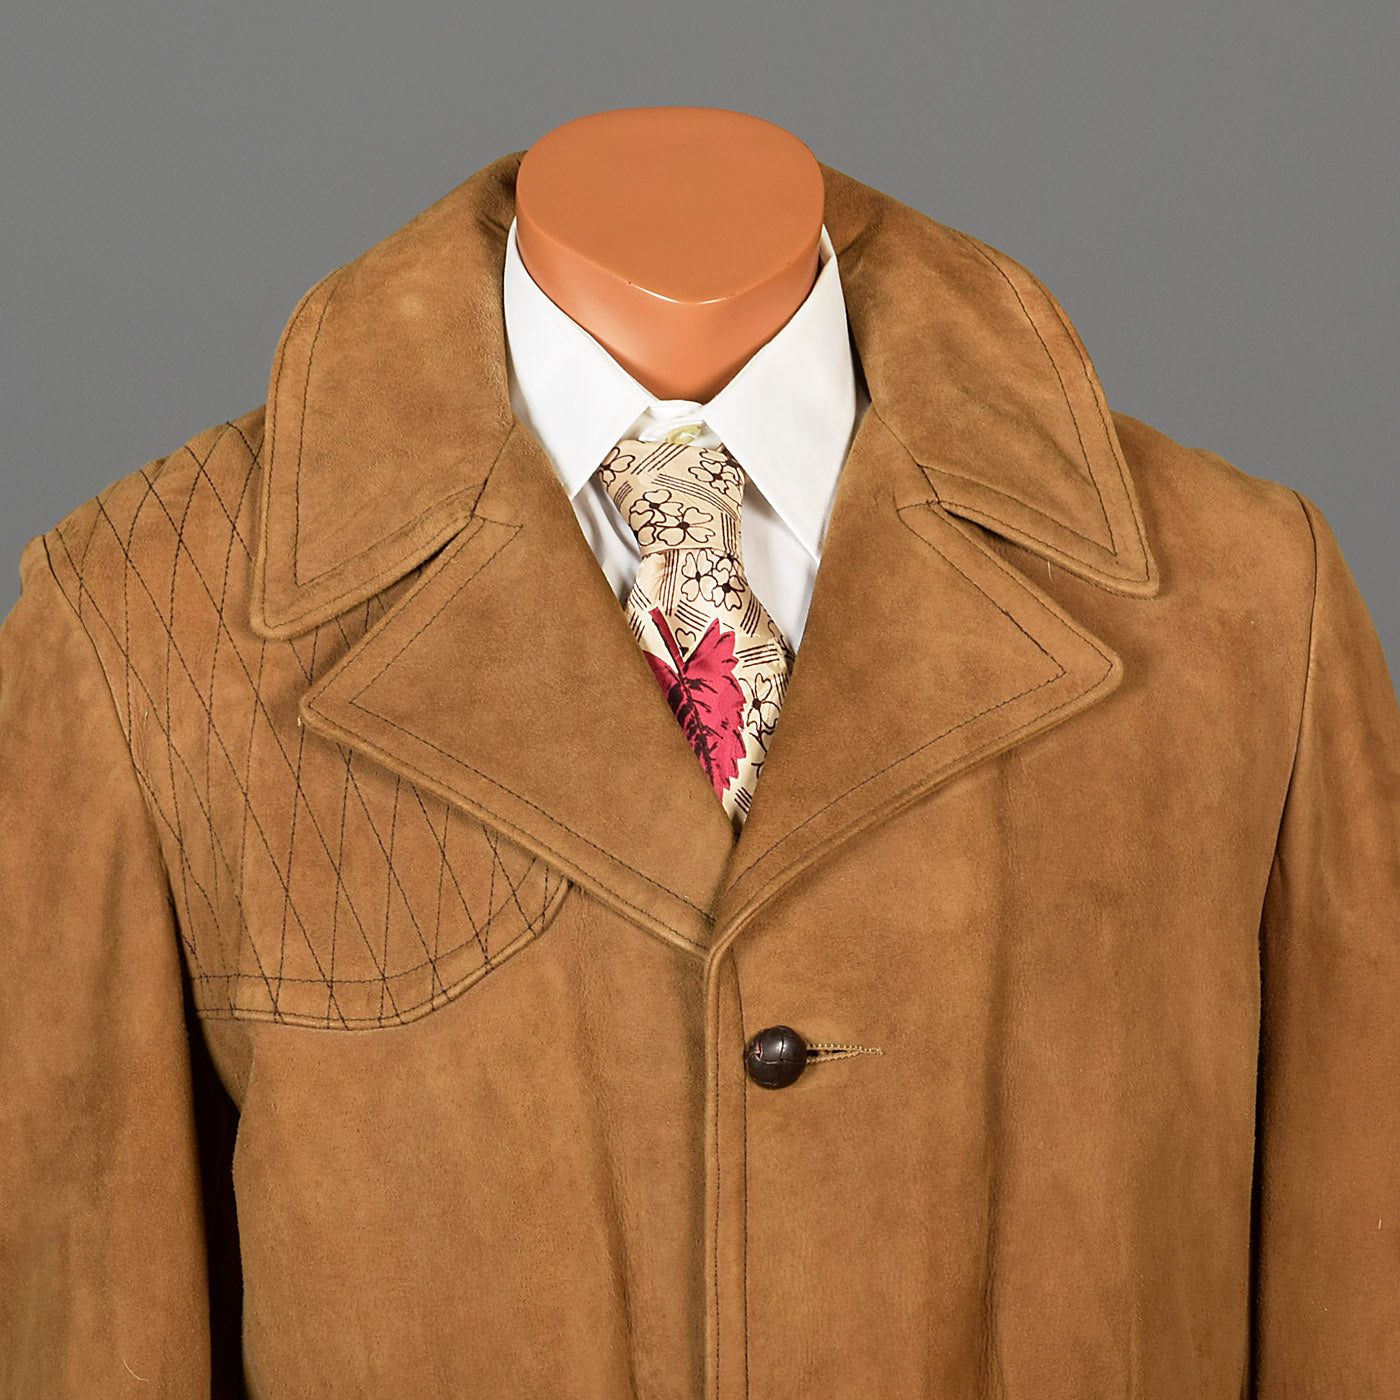 1960s Mens Suede Leather Shooting Jacket